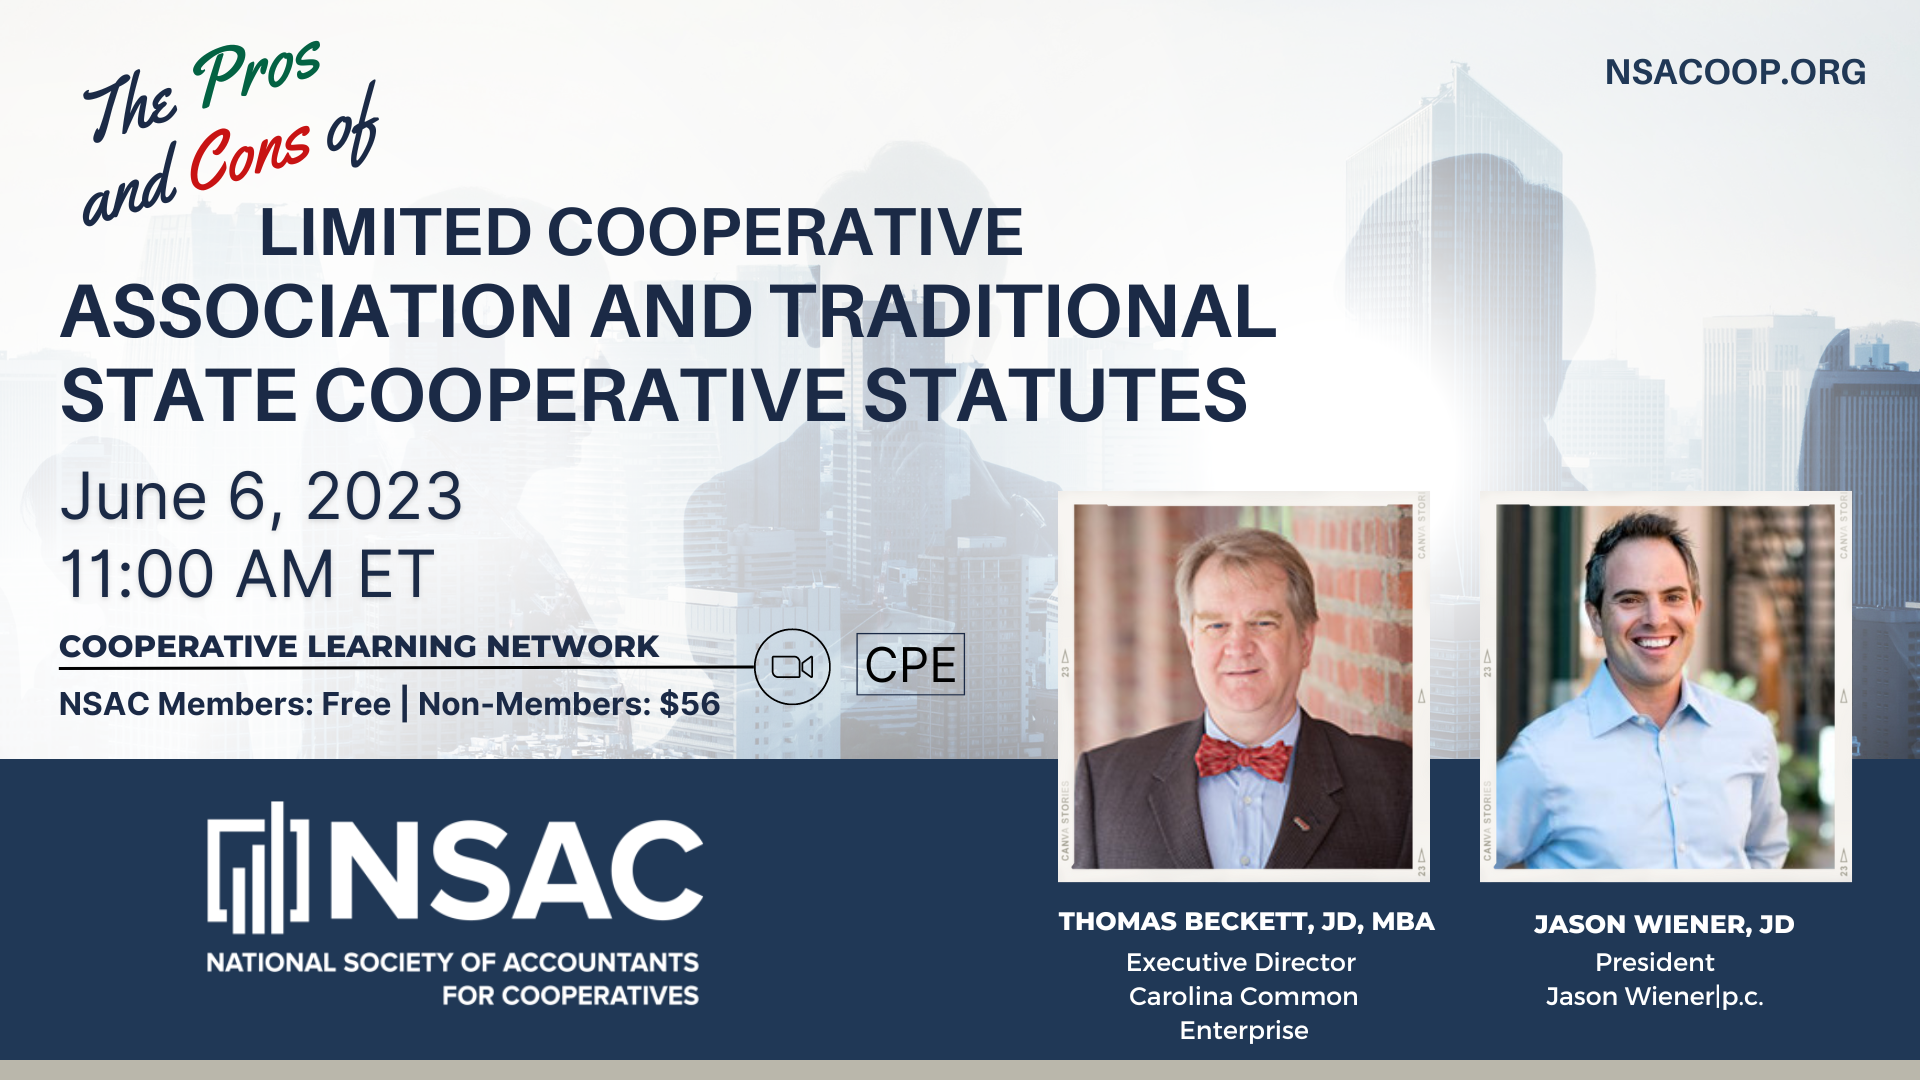 The Pros and Cons of Limited Cooperative Association and Traditional State Cooperative Statutes